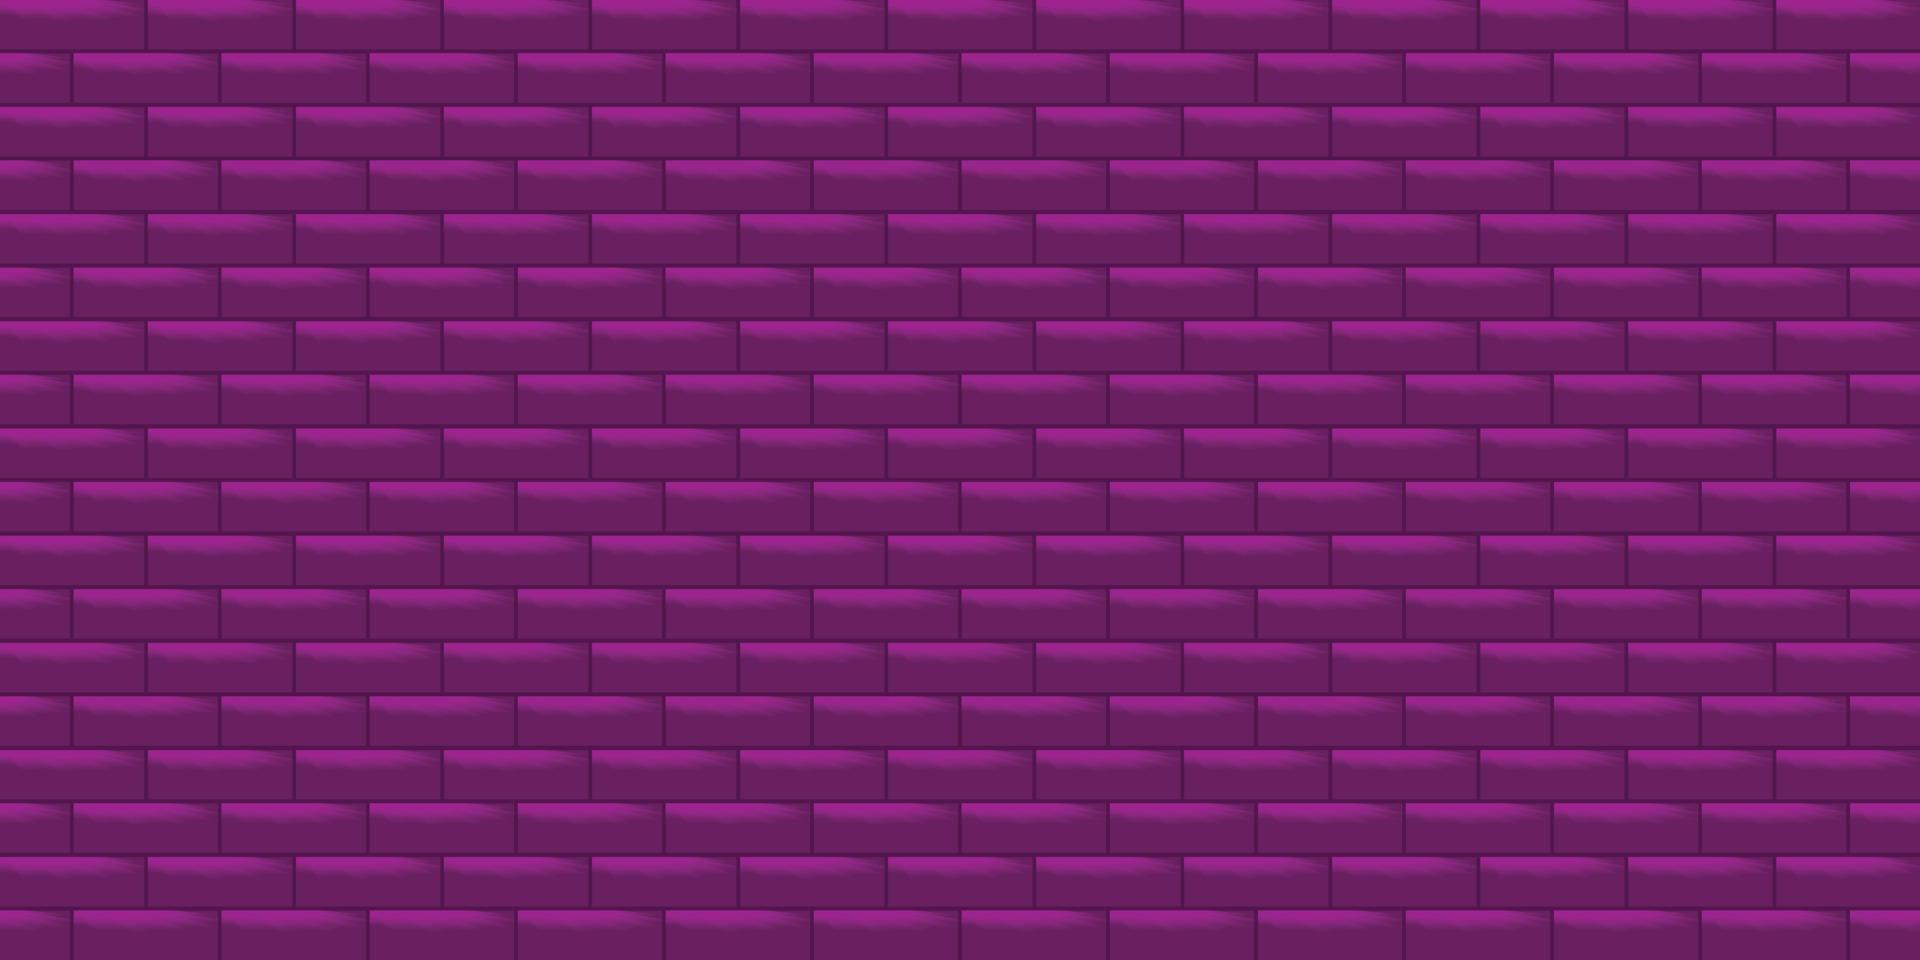 Season holiday purple brick wall abstract backgrounds texture building wallpaper backdrop pattern seamless vector illustration EPS